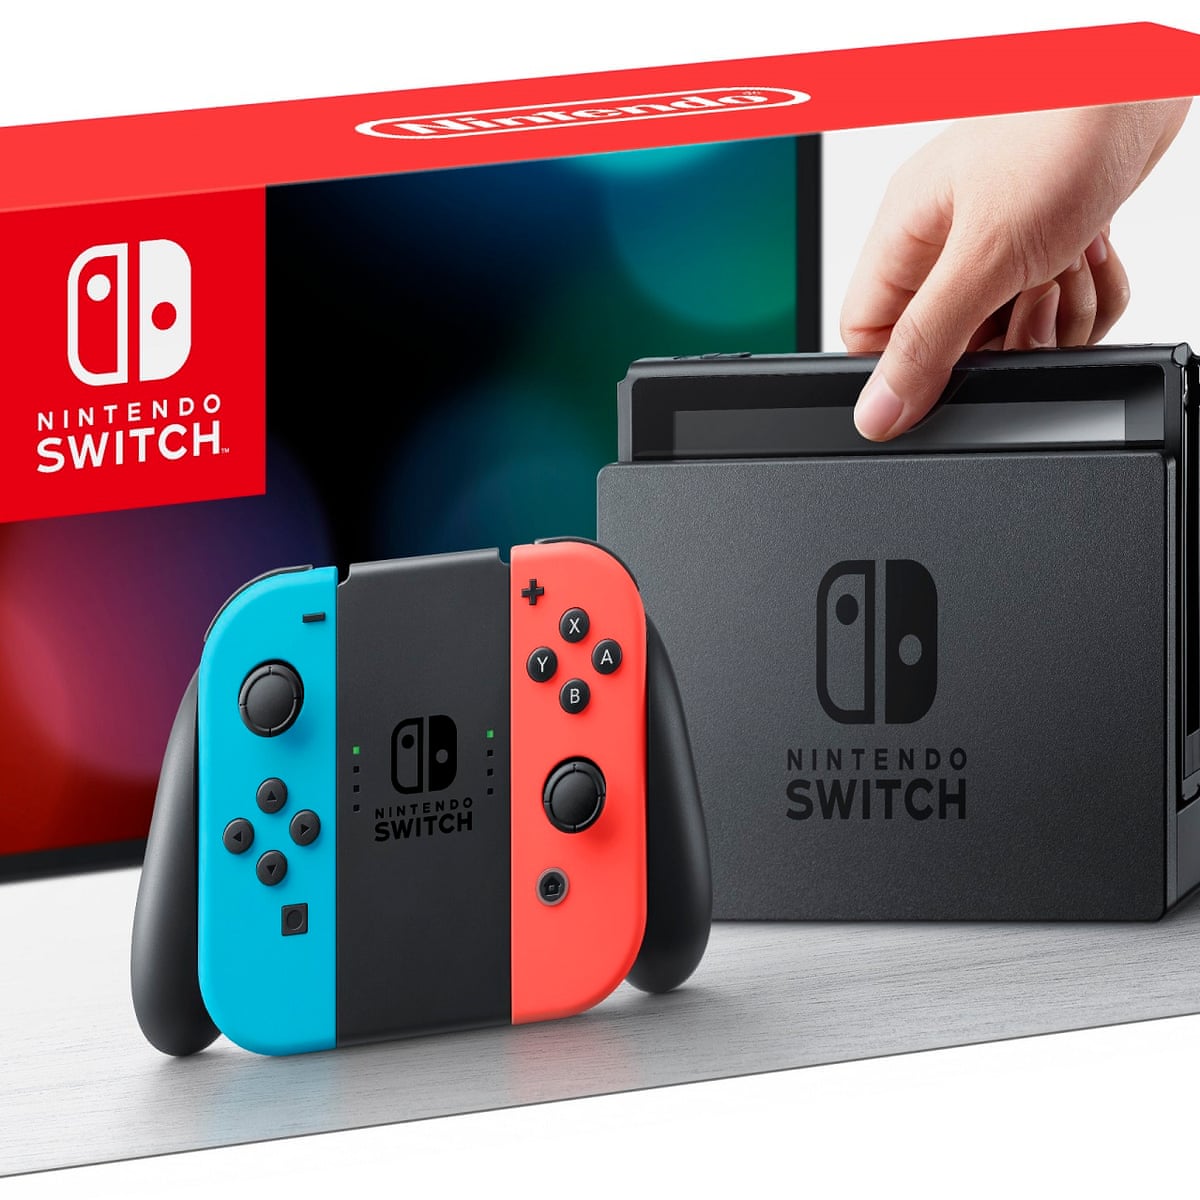 Nintendo Switch: everything you need to about the console | Nintendo Switch | The Guardian